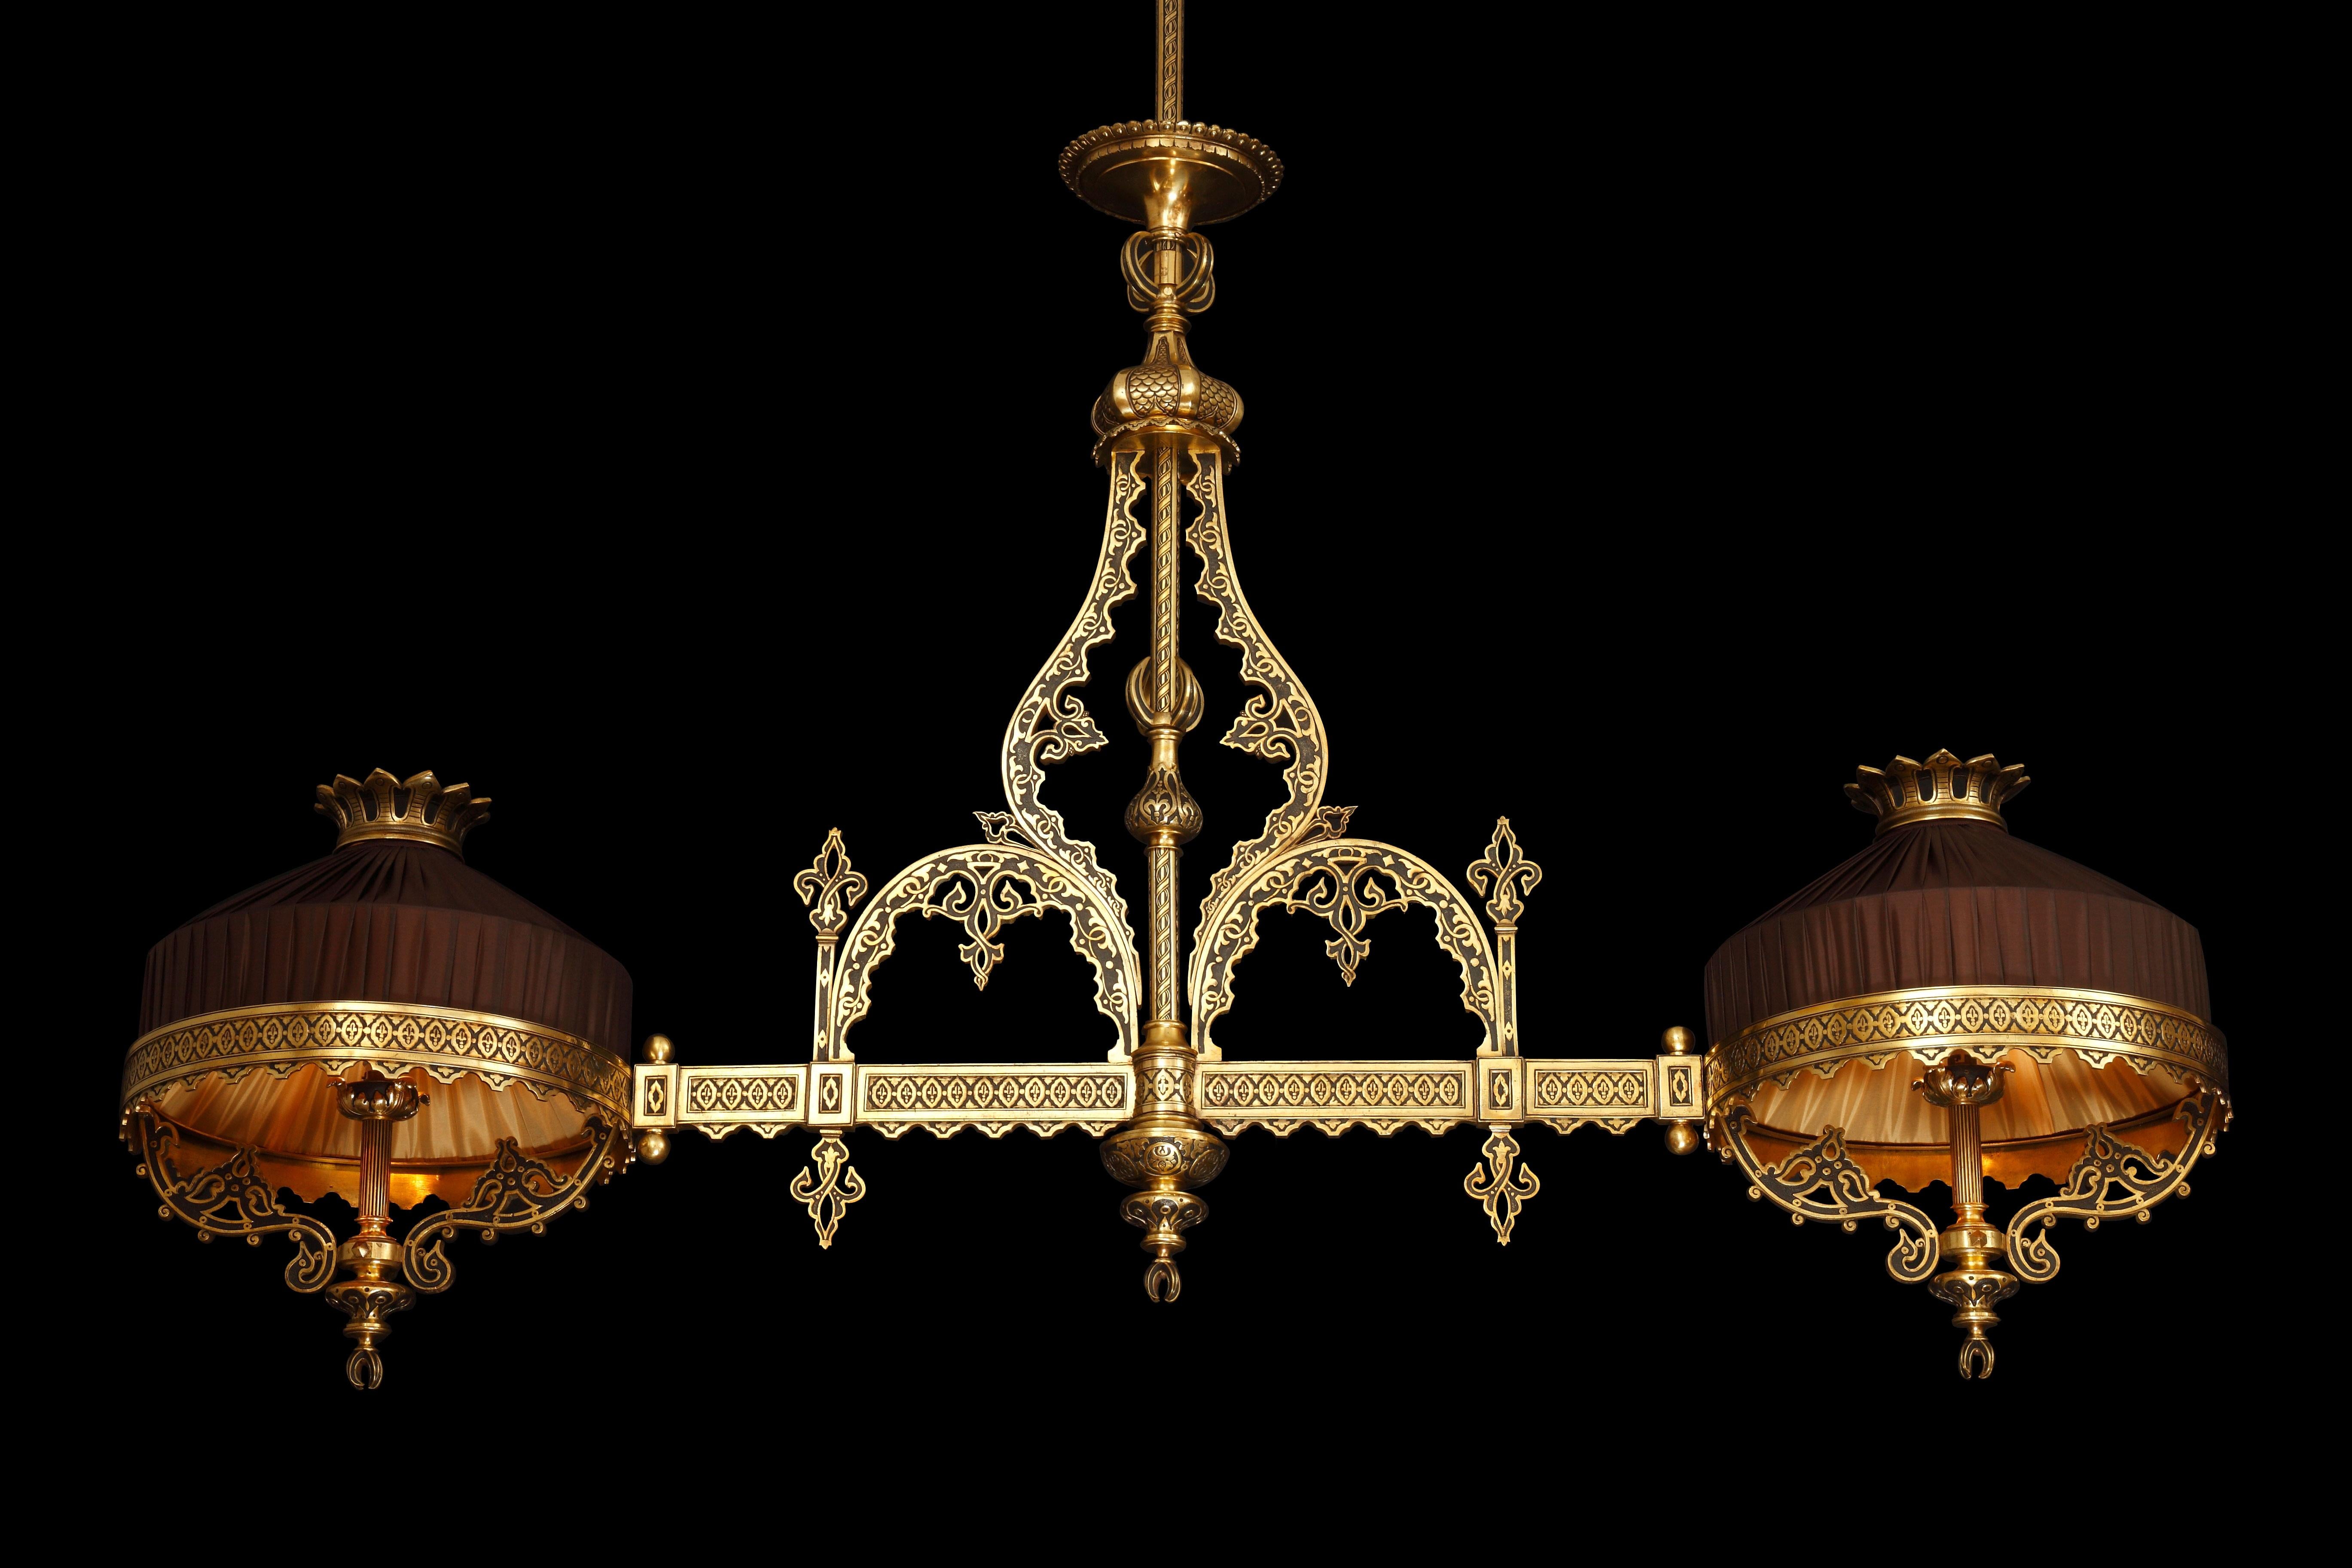 Large elongated Ottoman style chandelier with two lights, in bronze with double patina. The shaft is embellished with multi-lobed openwork arches evoking Moorish architecture, and adorned with stylized patterns covering the entire chandelier. It is